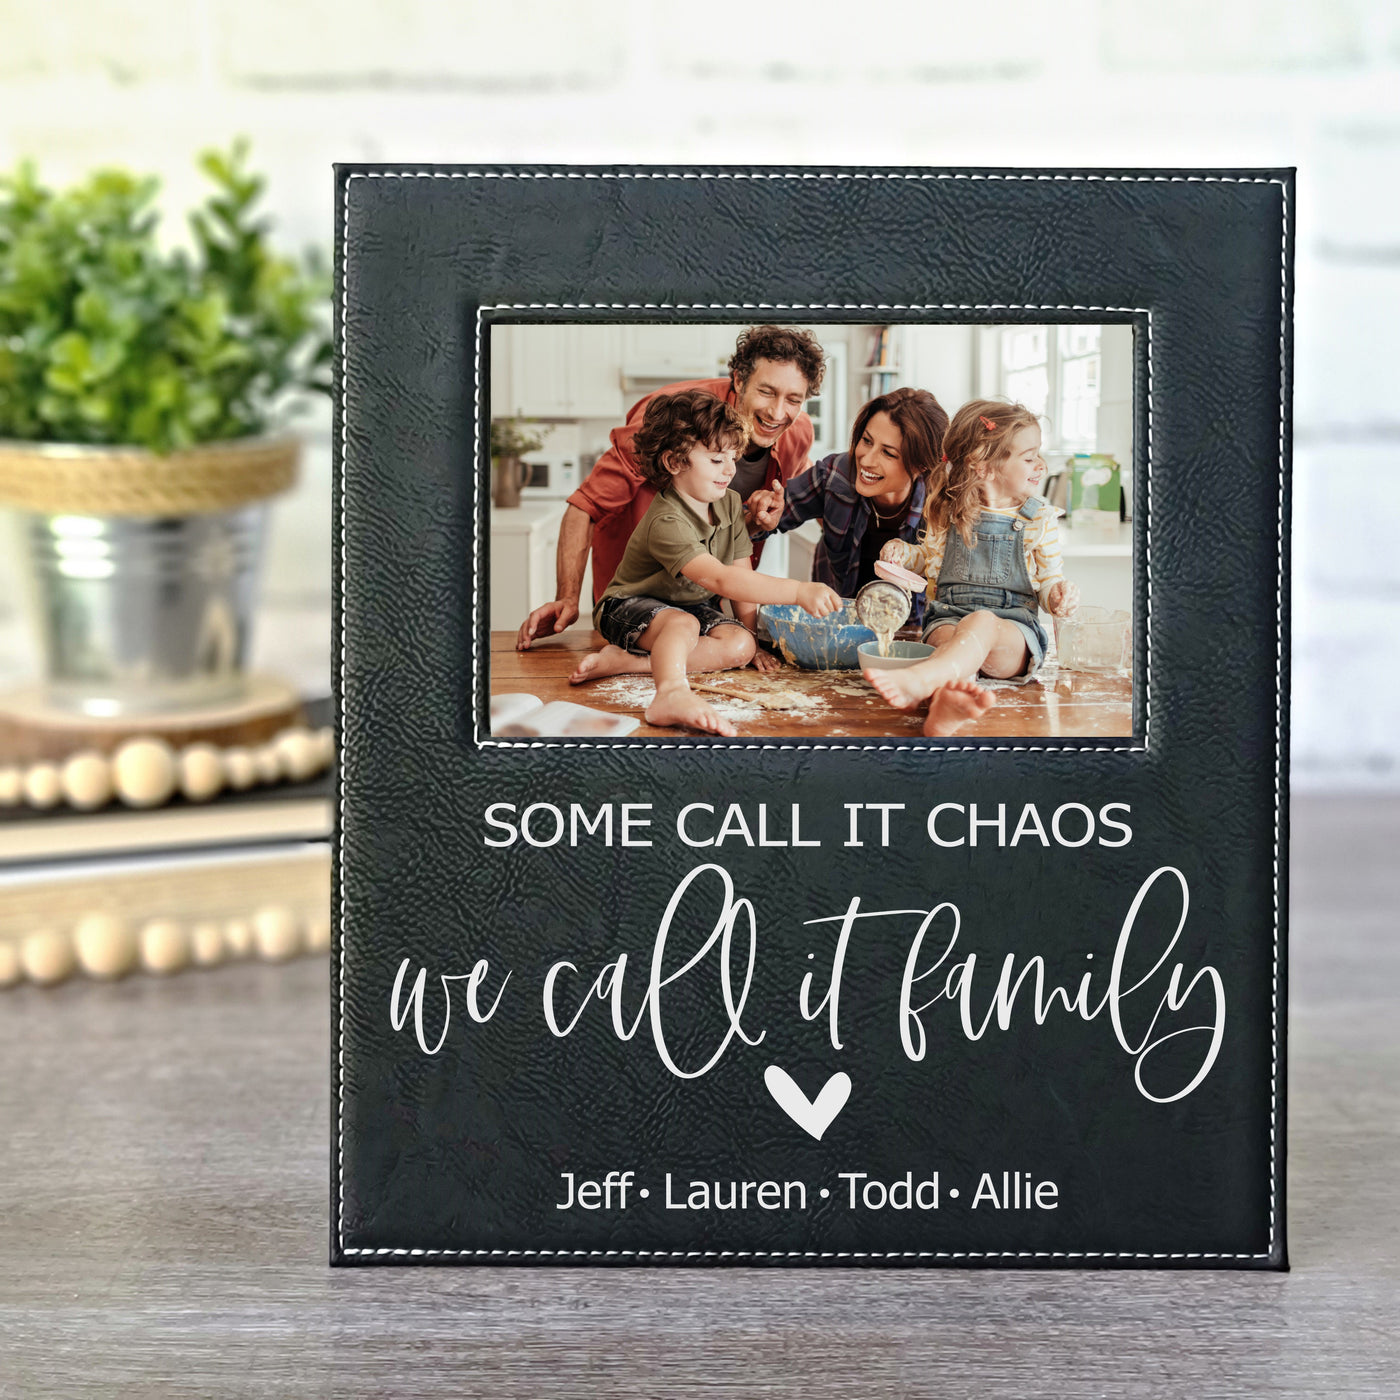 Personalized We Call it Family | Black & Silver Leatherette Picture Frame